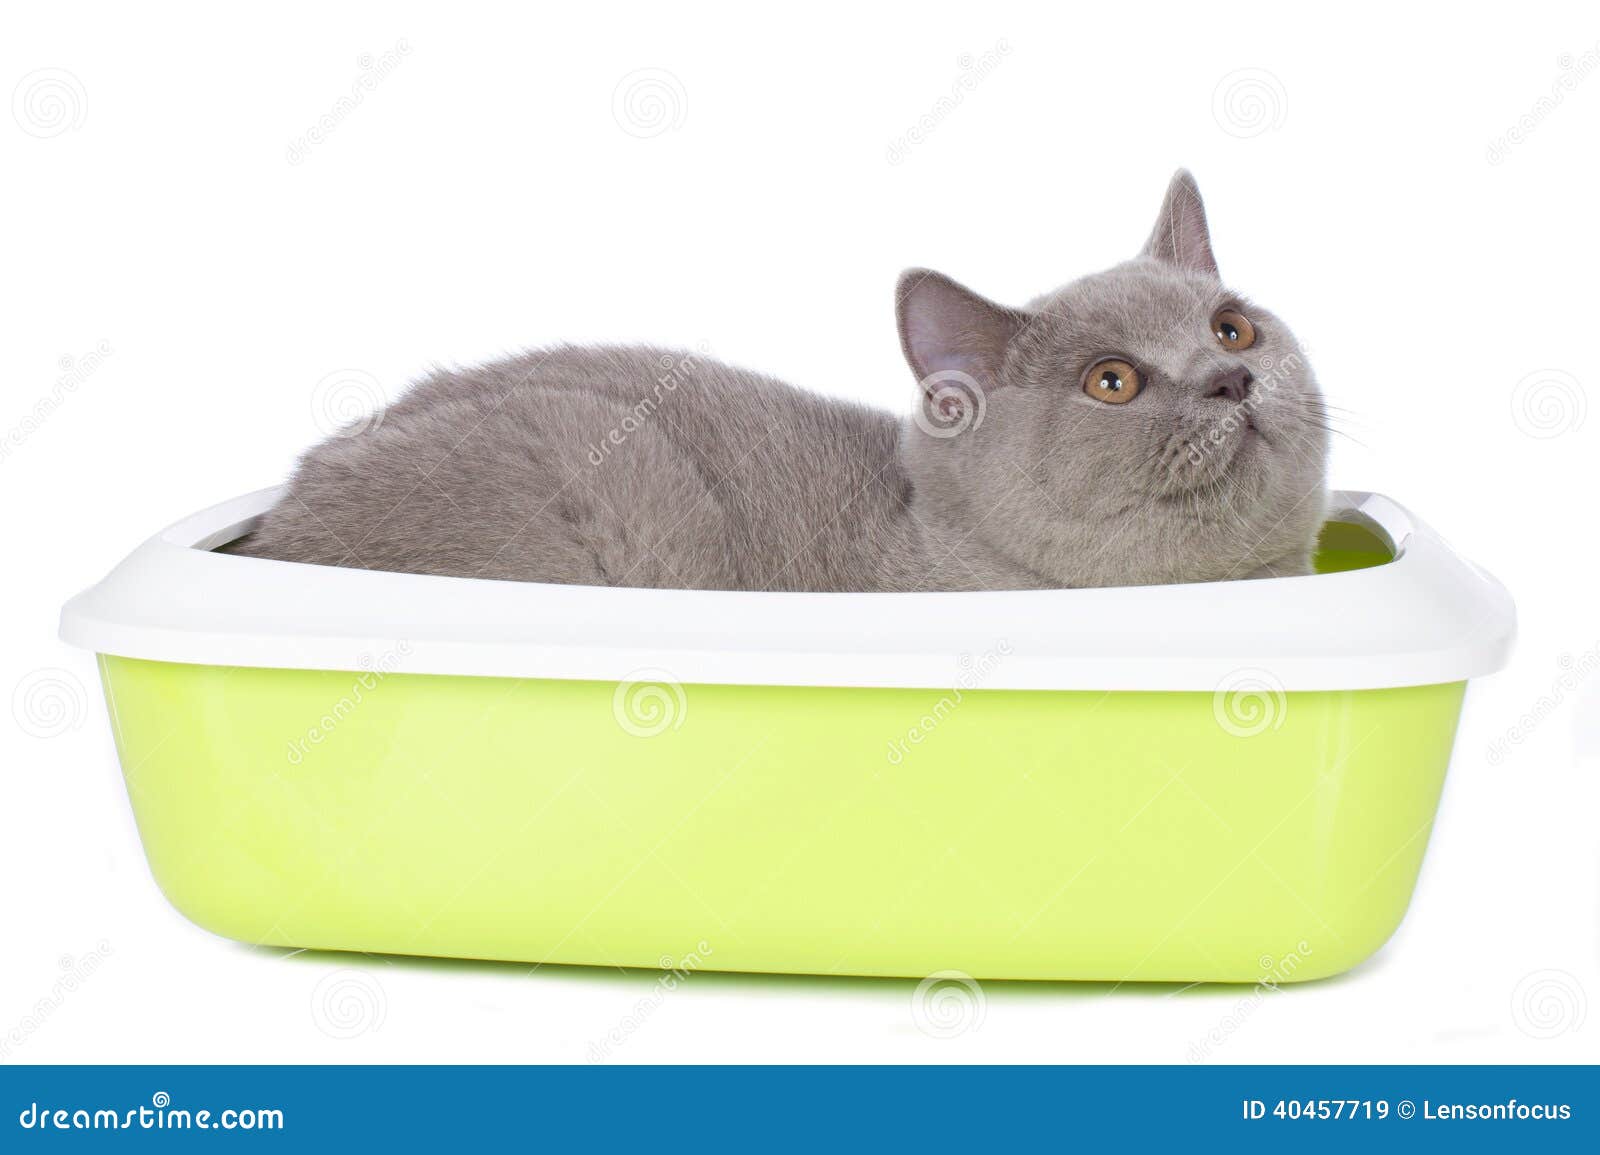 Cat Sitting In A Litter Box Stock Image Image of system, obstipation